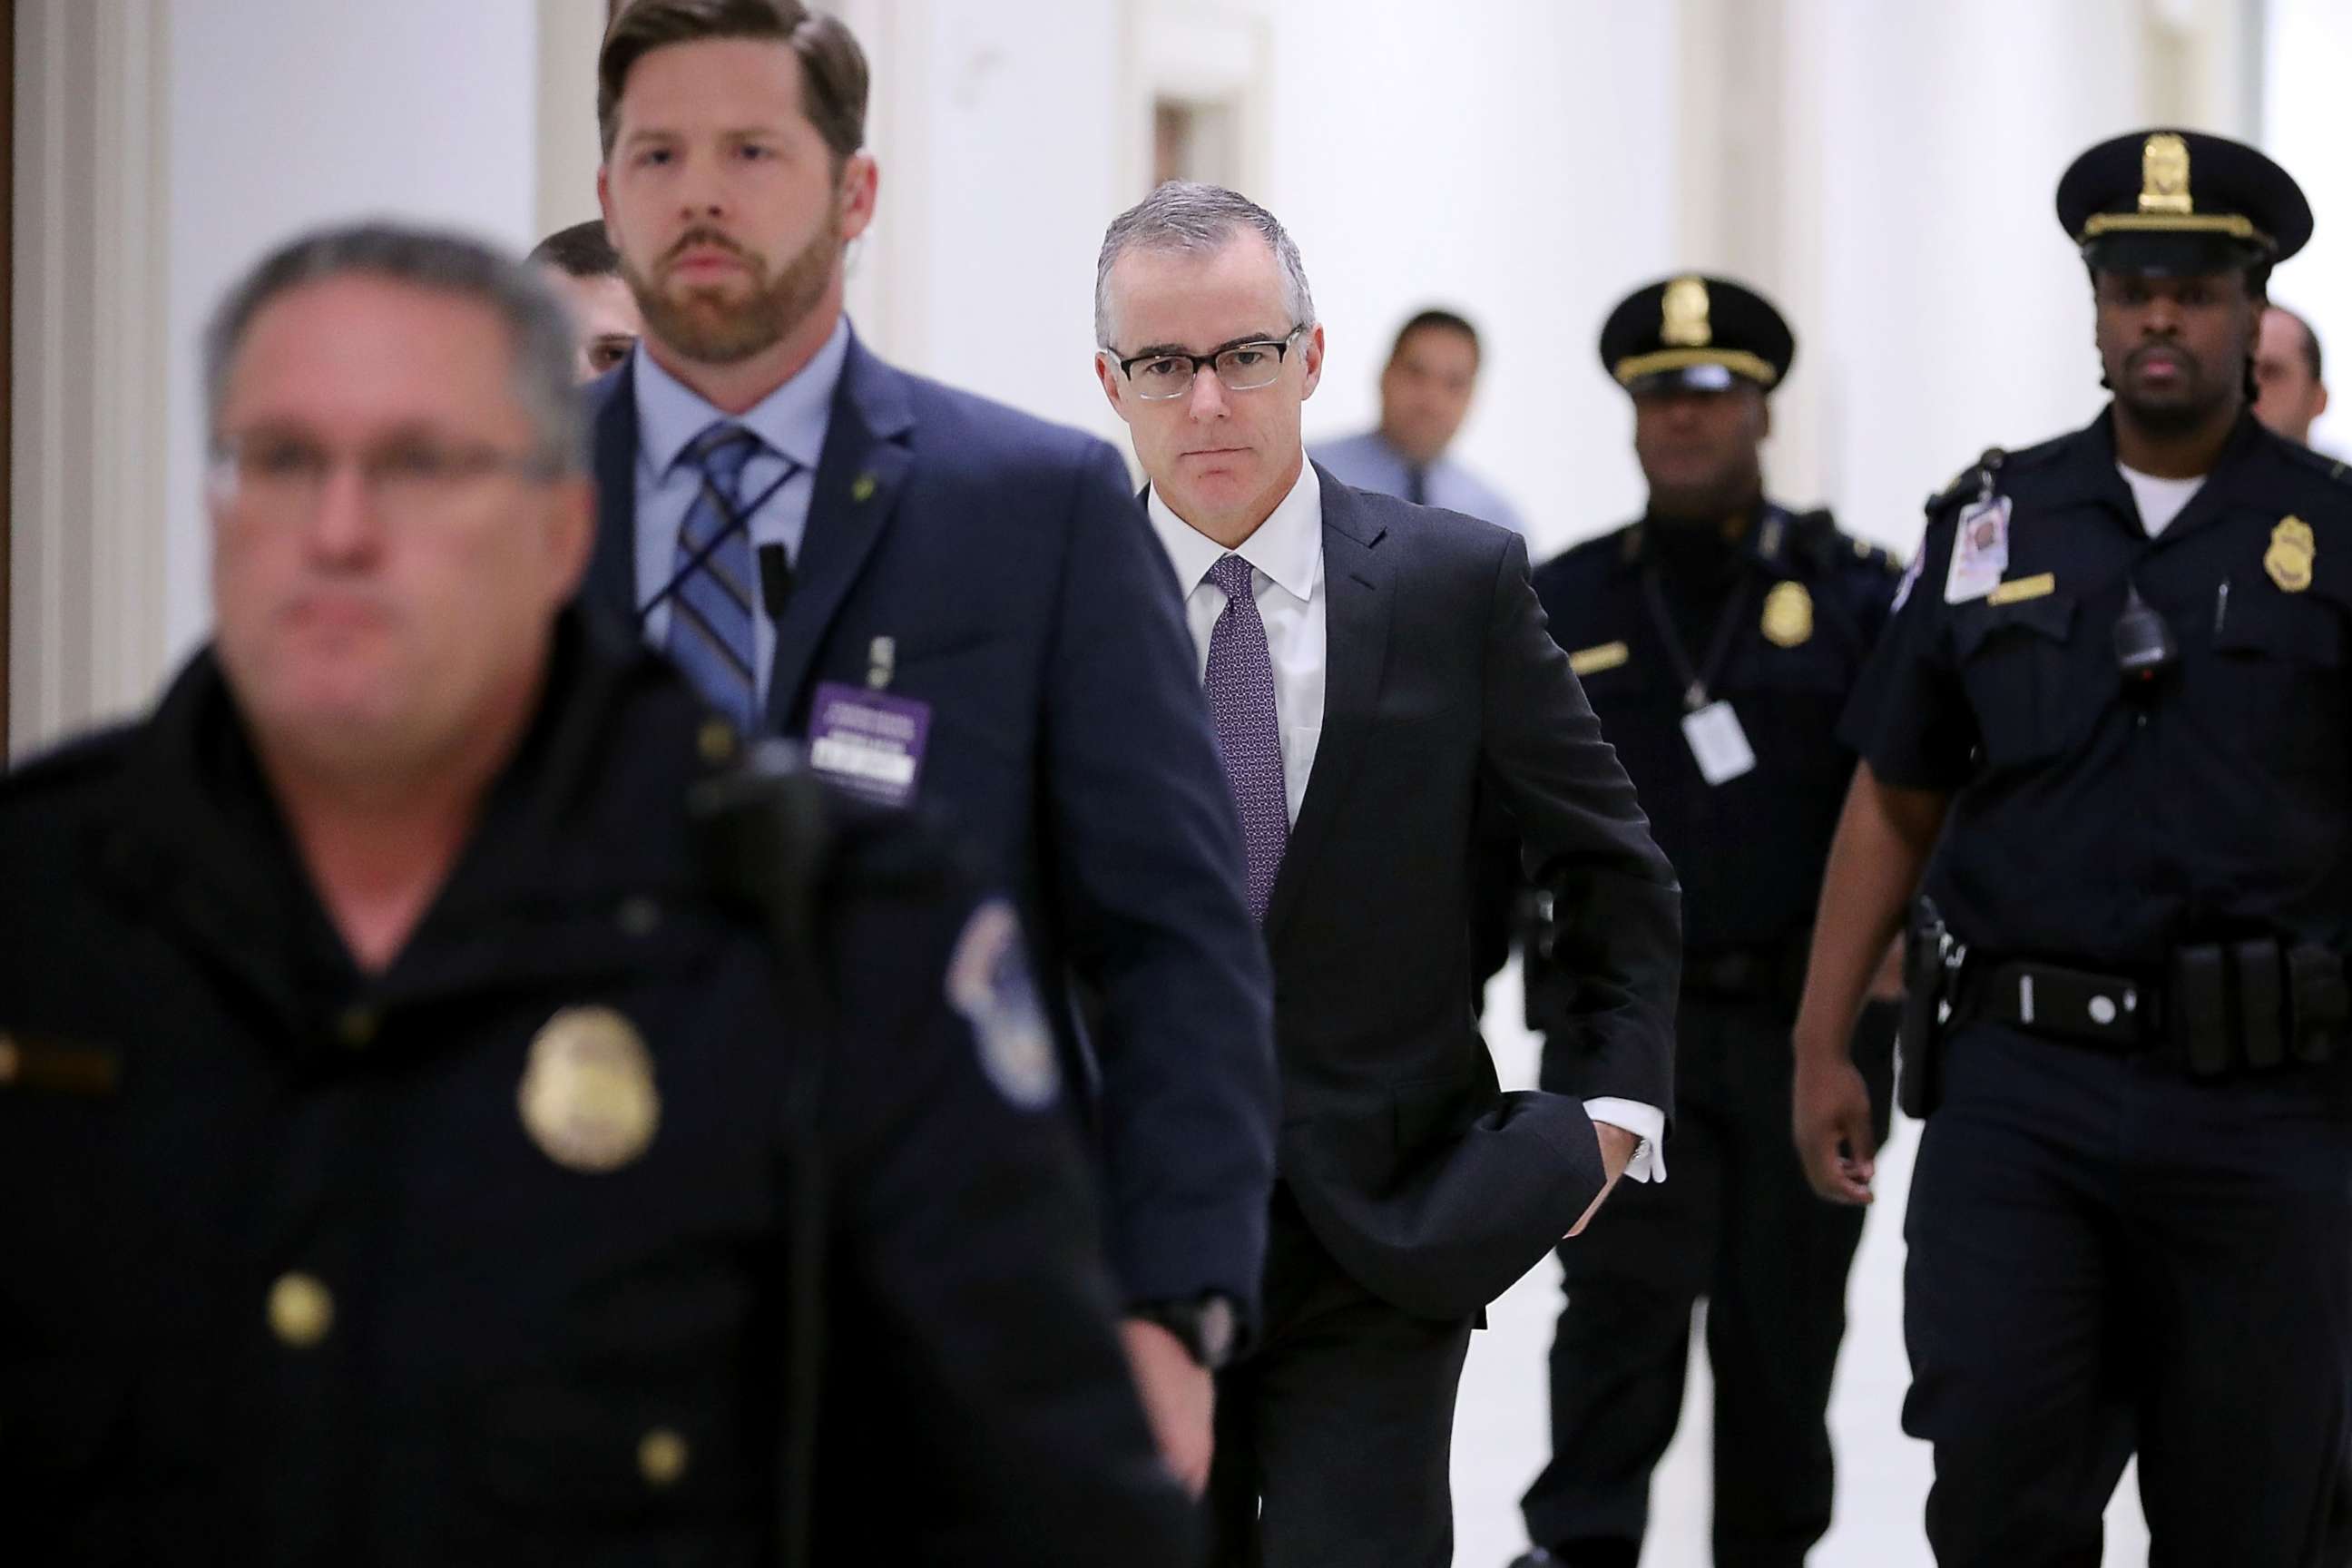 PHOTO: FBI Deputy Director Andrew McCabe is escorted by U.S. Capitol Police before a meeting with members of the Oversight and Government Reform and Judiciary committees in Washington, Dec. 21, 2017.